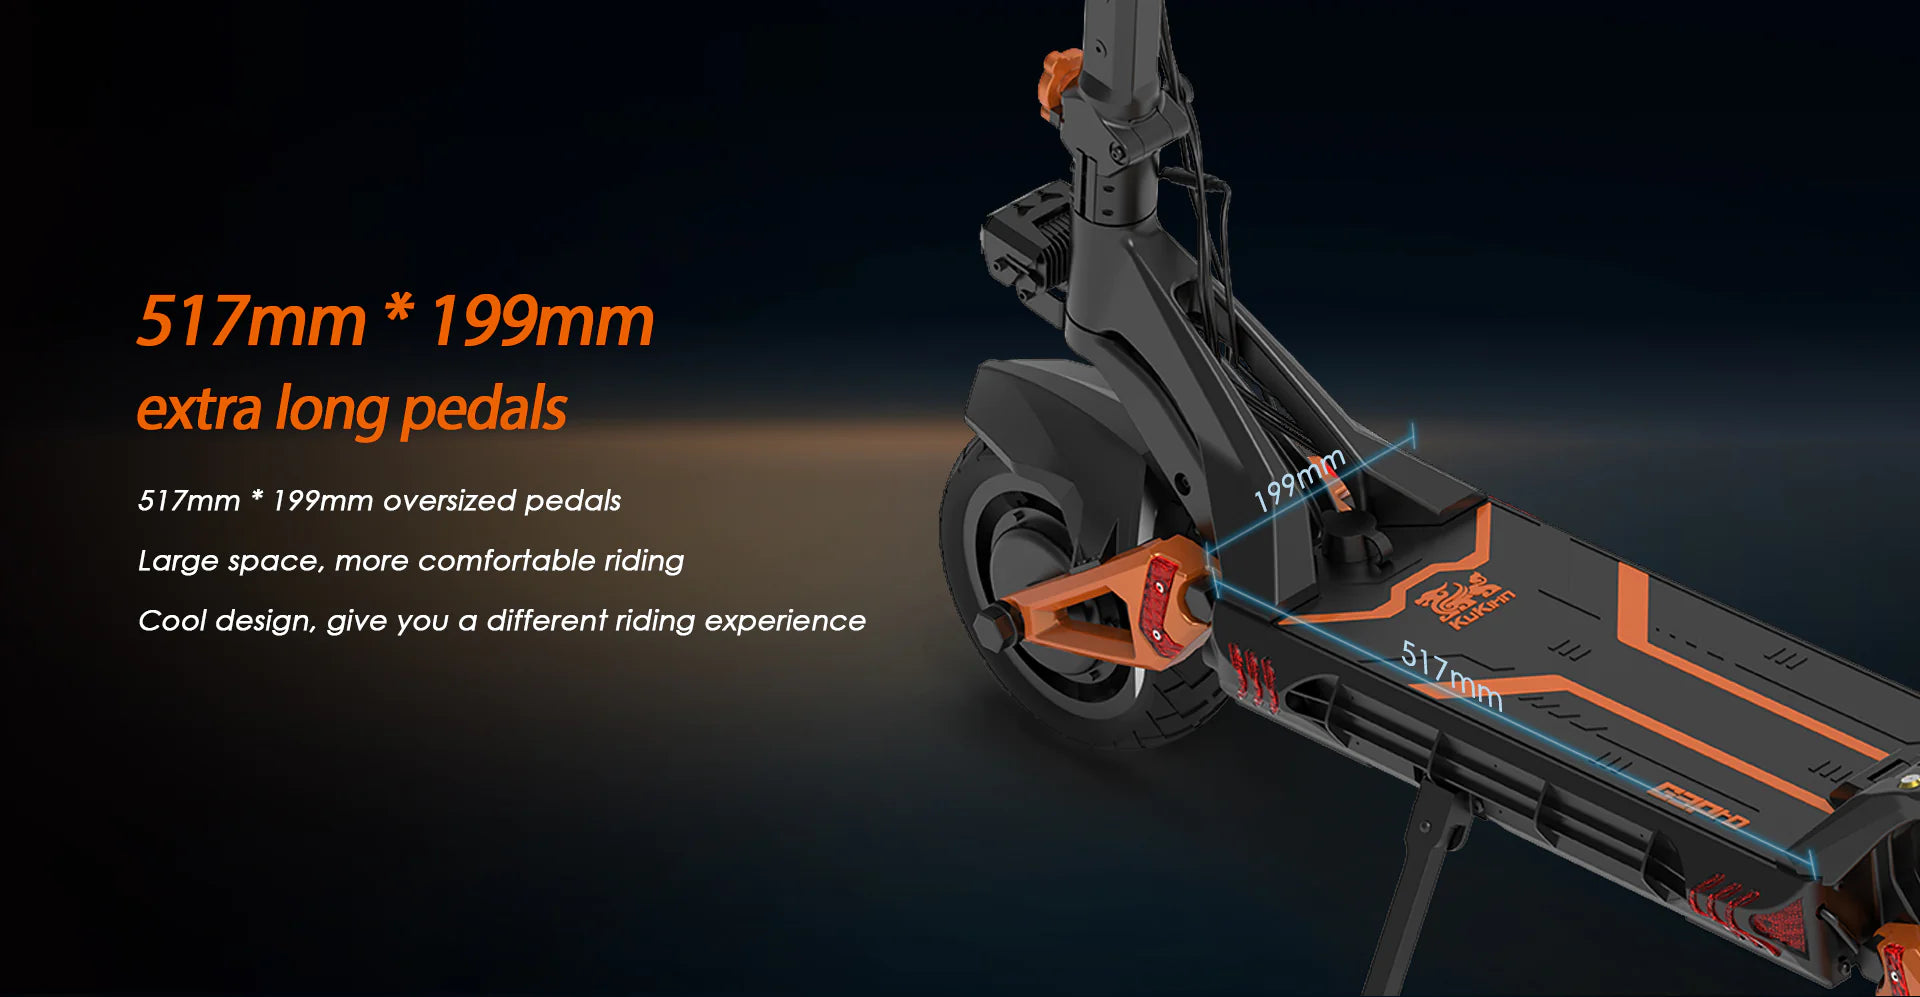 Kukirin G3 Pro Electric Scooter - Power up with 1200W motor and long-lasting 1200AH battery